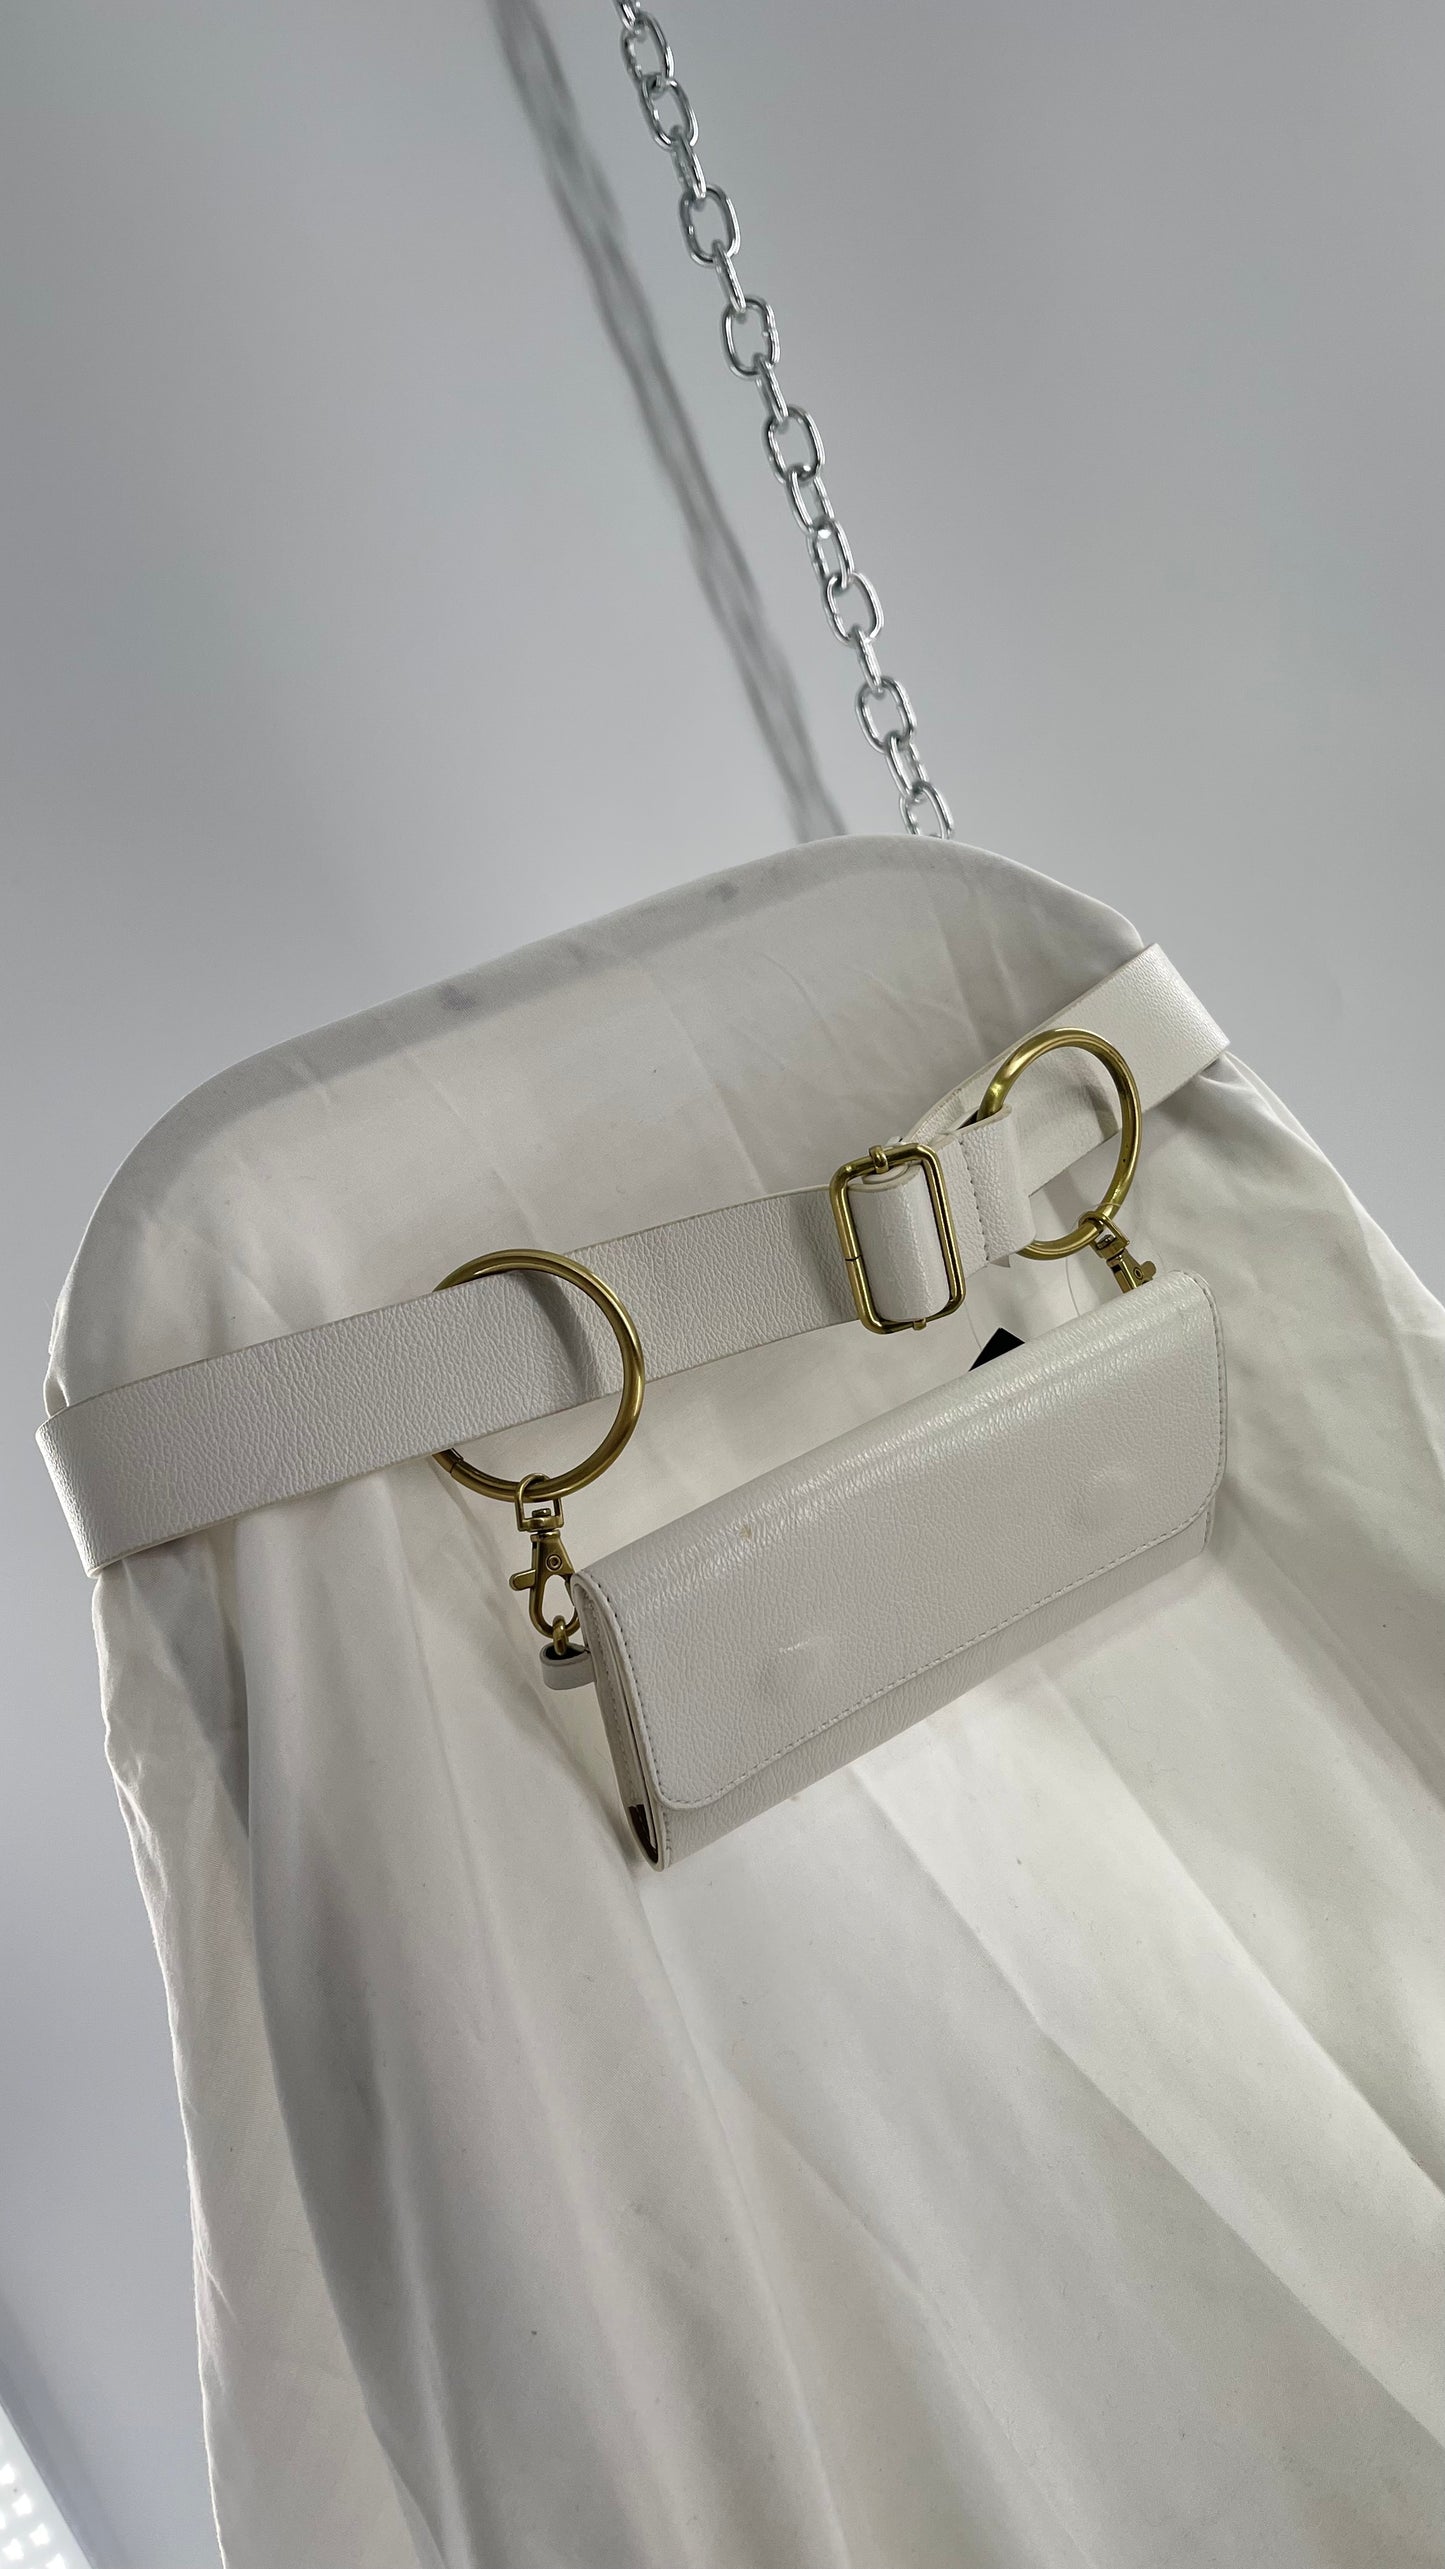 Anthropologie White Belt Bag with Gold Hoops